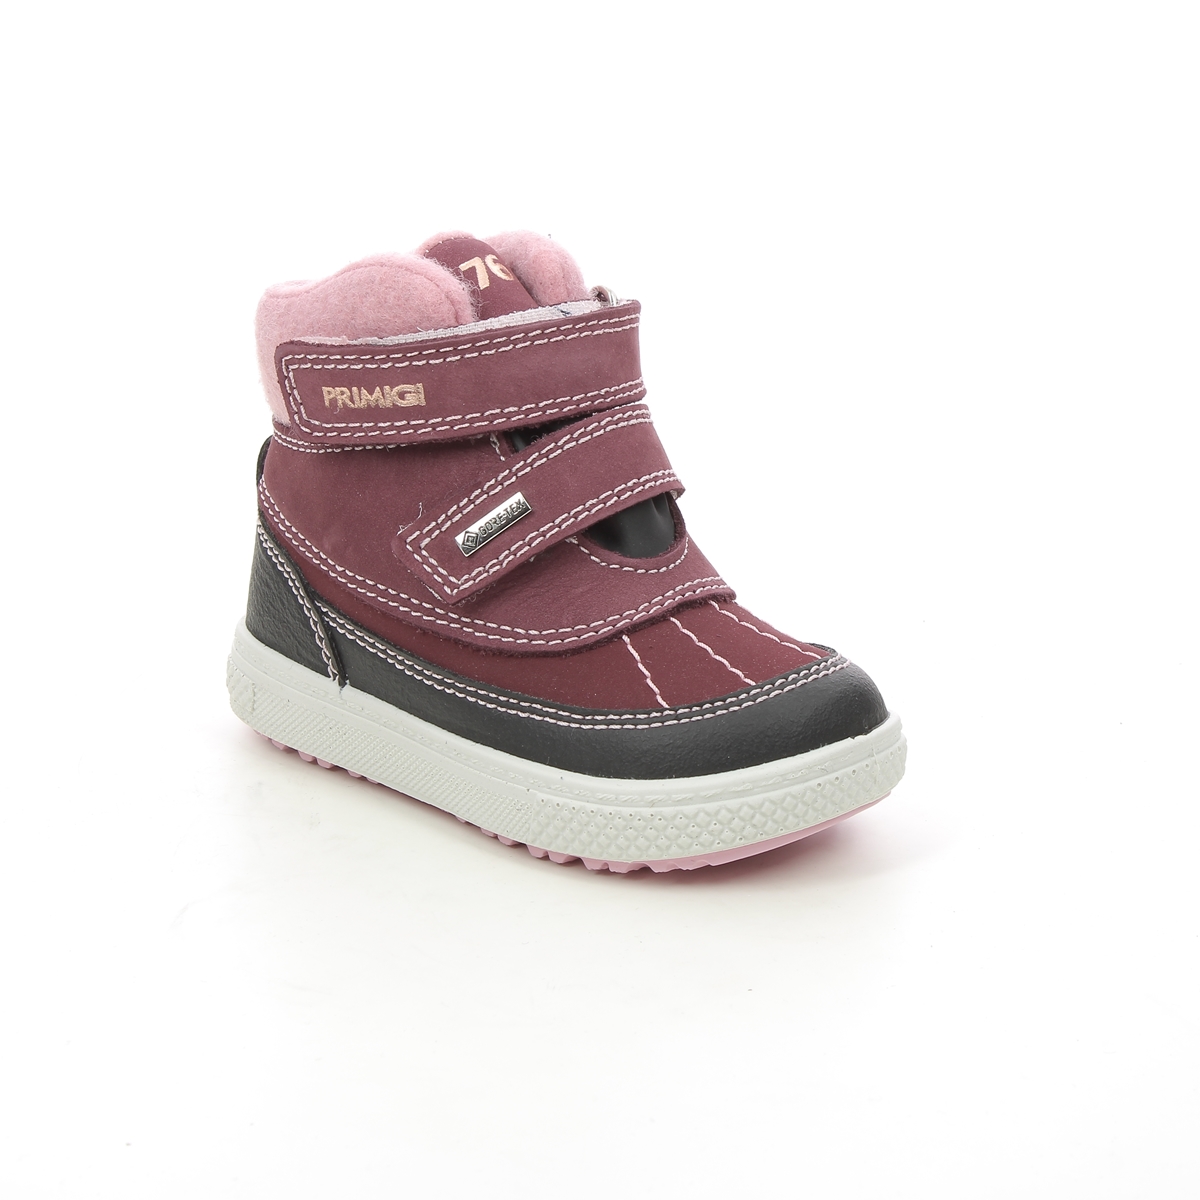 Primigi Barth 19 Gtx Burgundy Kids Toddler Girls Boots 8357922- in a Plain Leather in Size 22